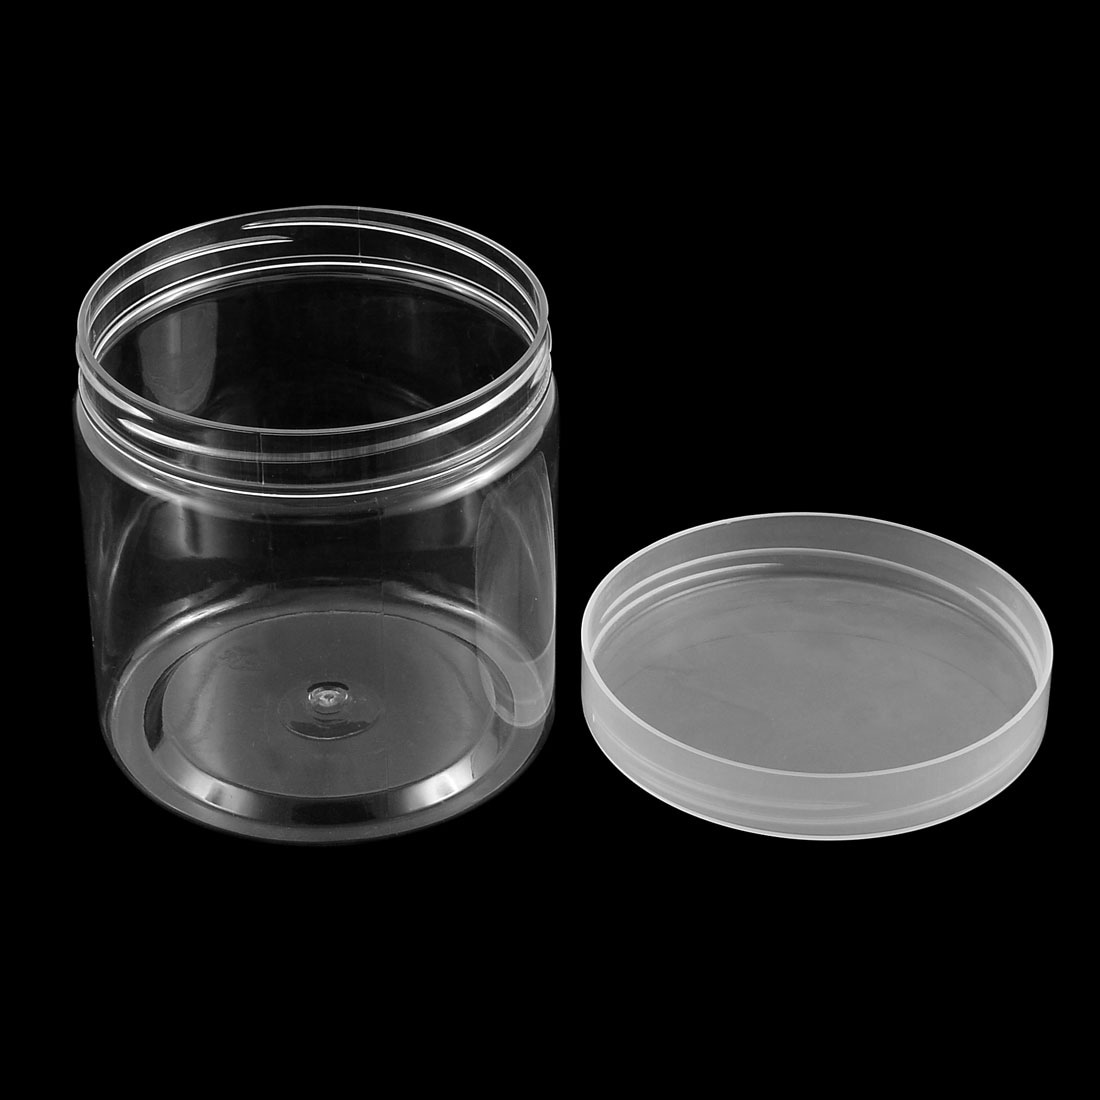 https://ak1.ostkcdn.com/images/products/is/images/direct/933916c51efda0ce2fa96541e28b1eed25b801fc/Home-Plastic-Cylinder-Shaped-Transparent-Food-Storage-Box-Container-10x10cm.jpg